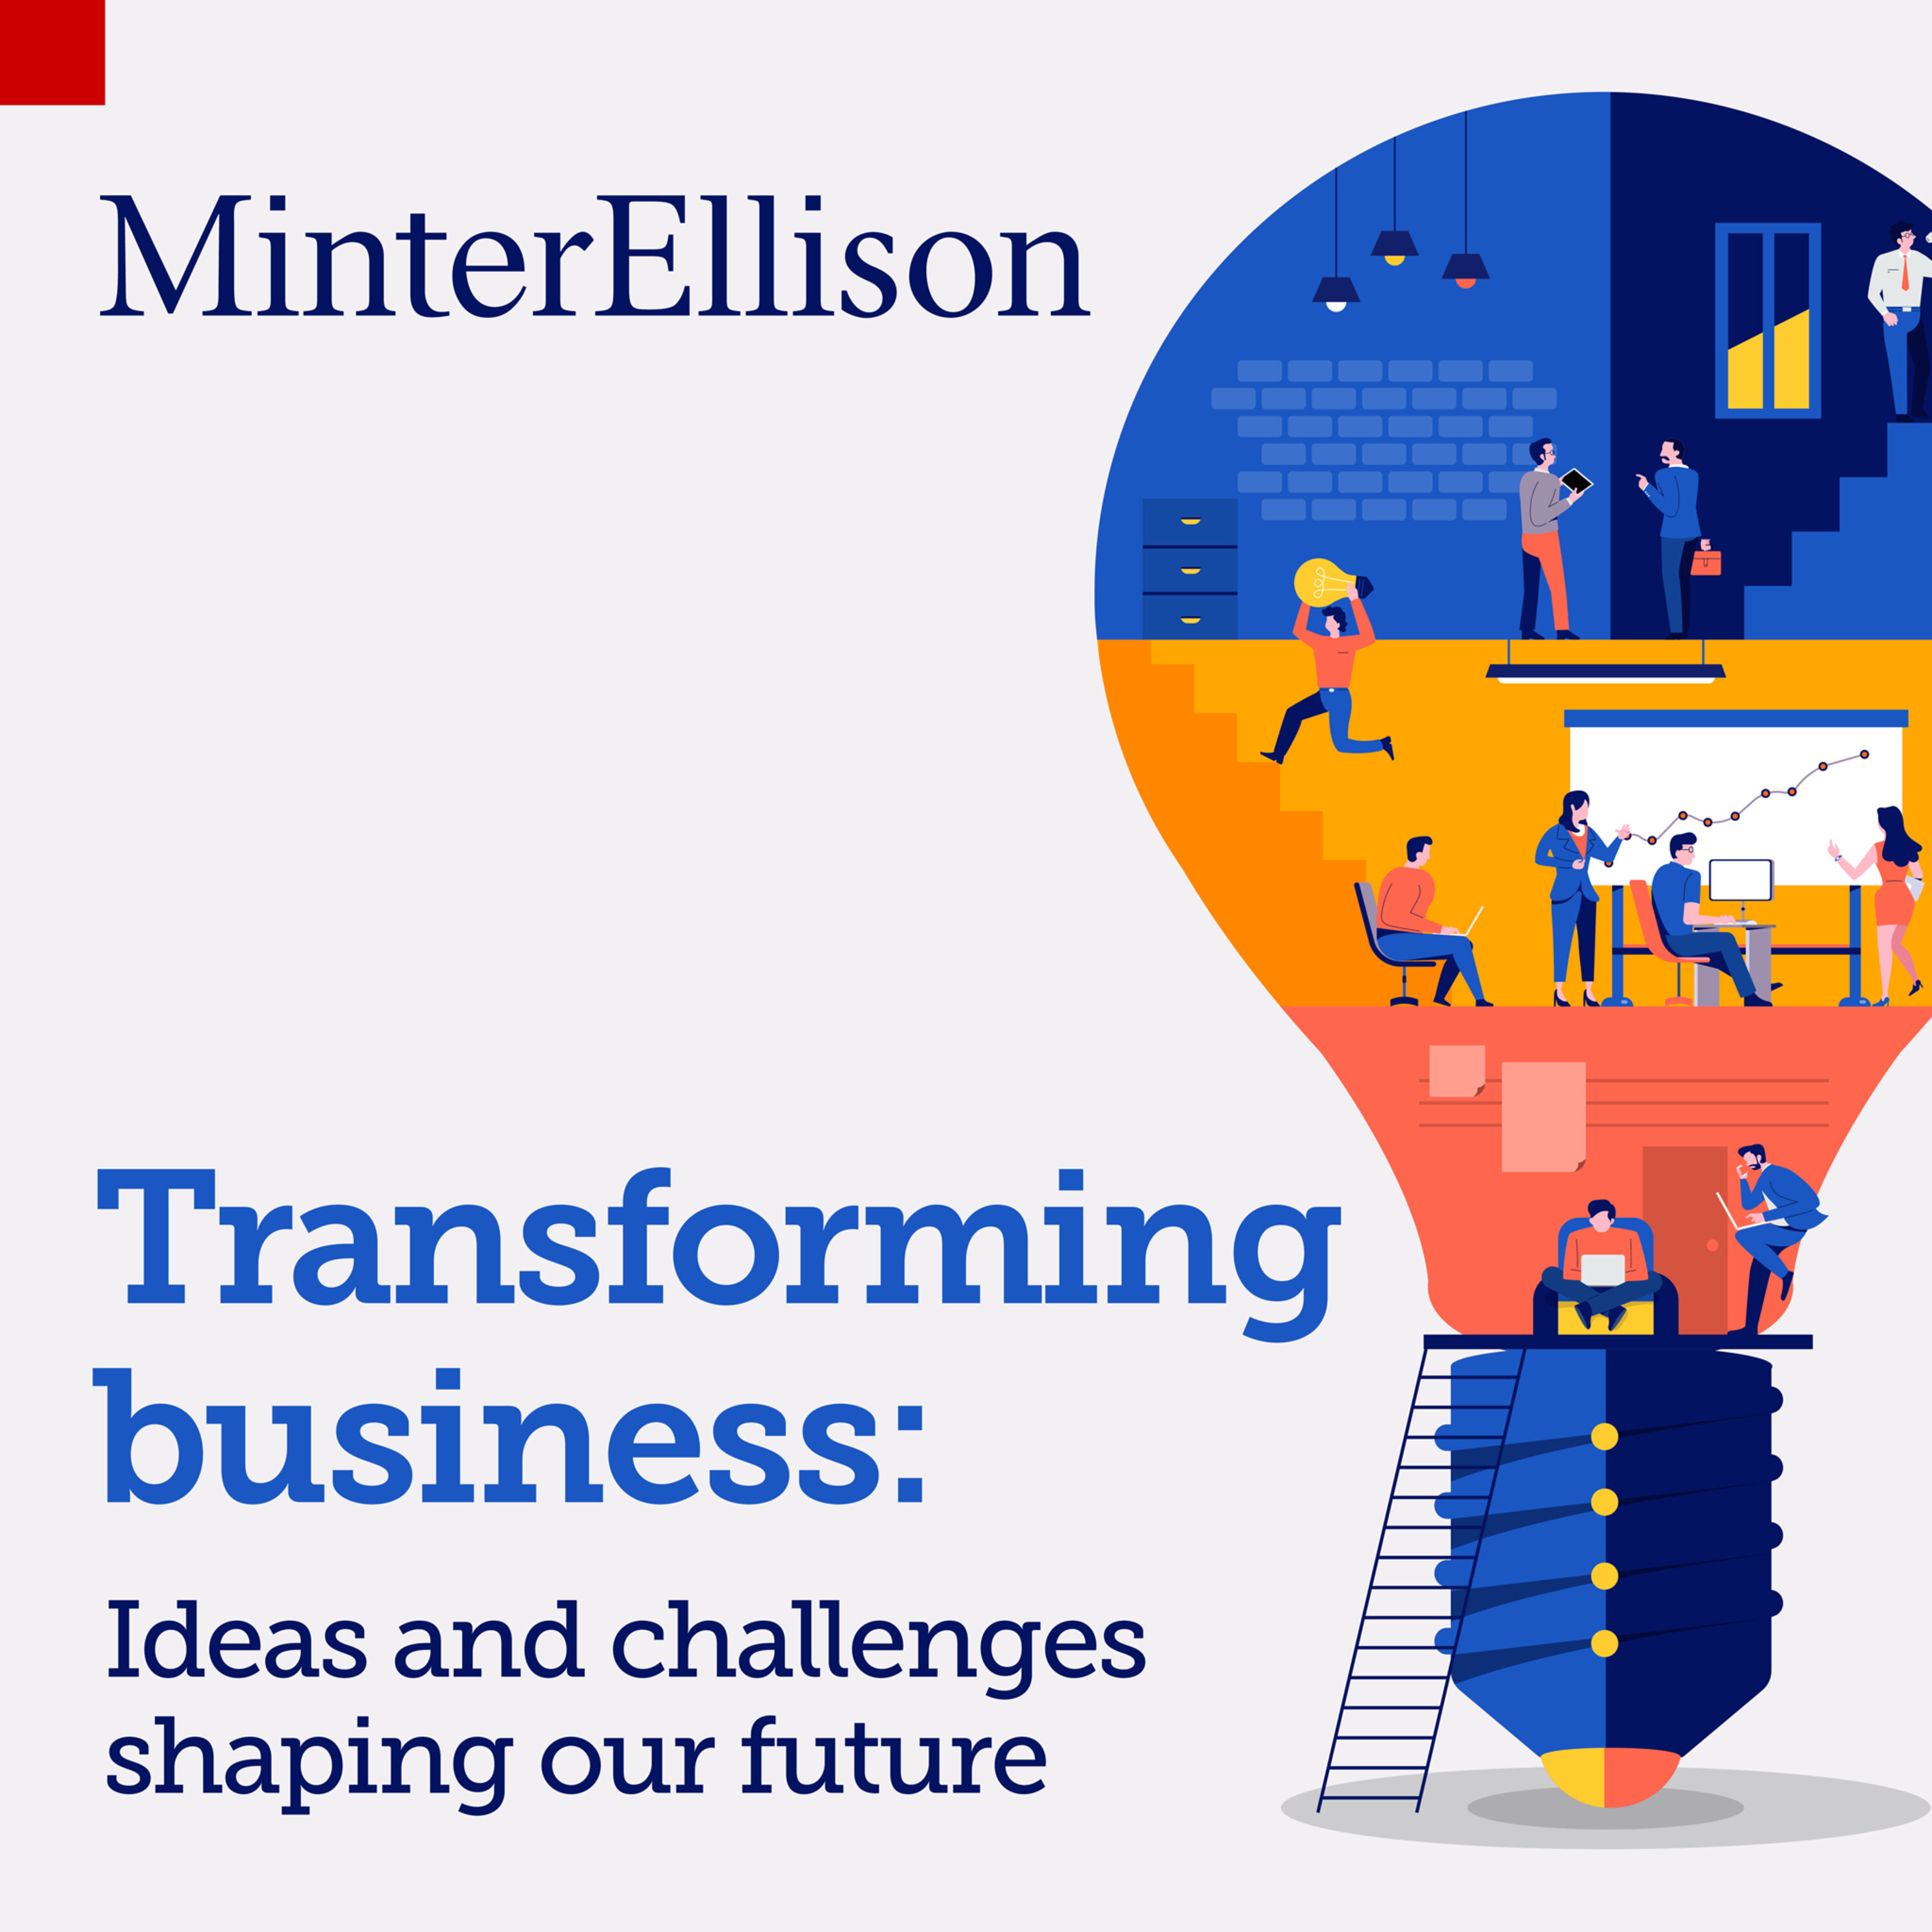 Trailer: Transforming business with MinterEllison: ideas and challenges that are shaping our future